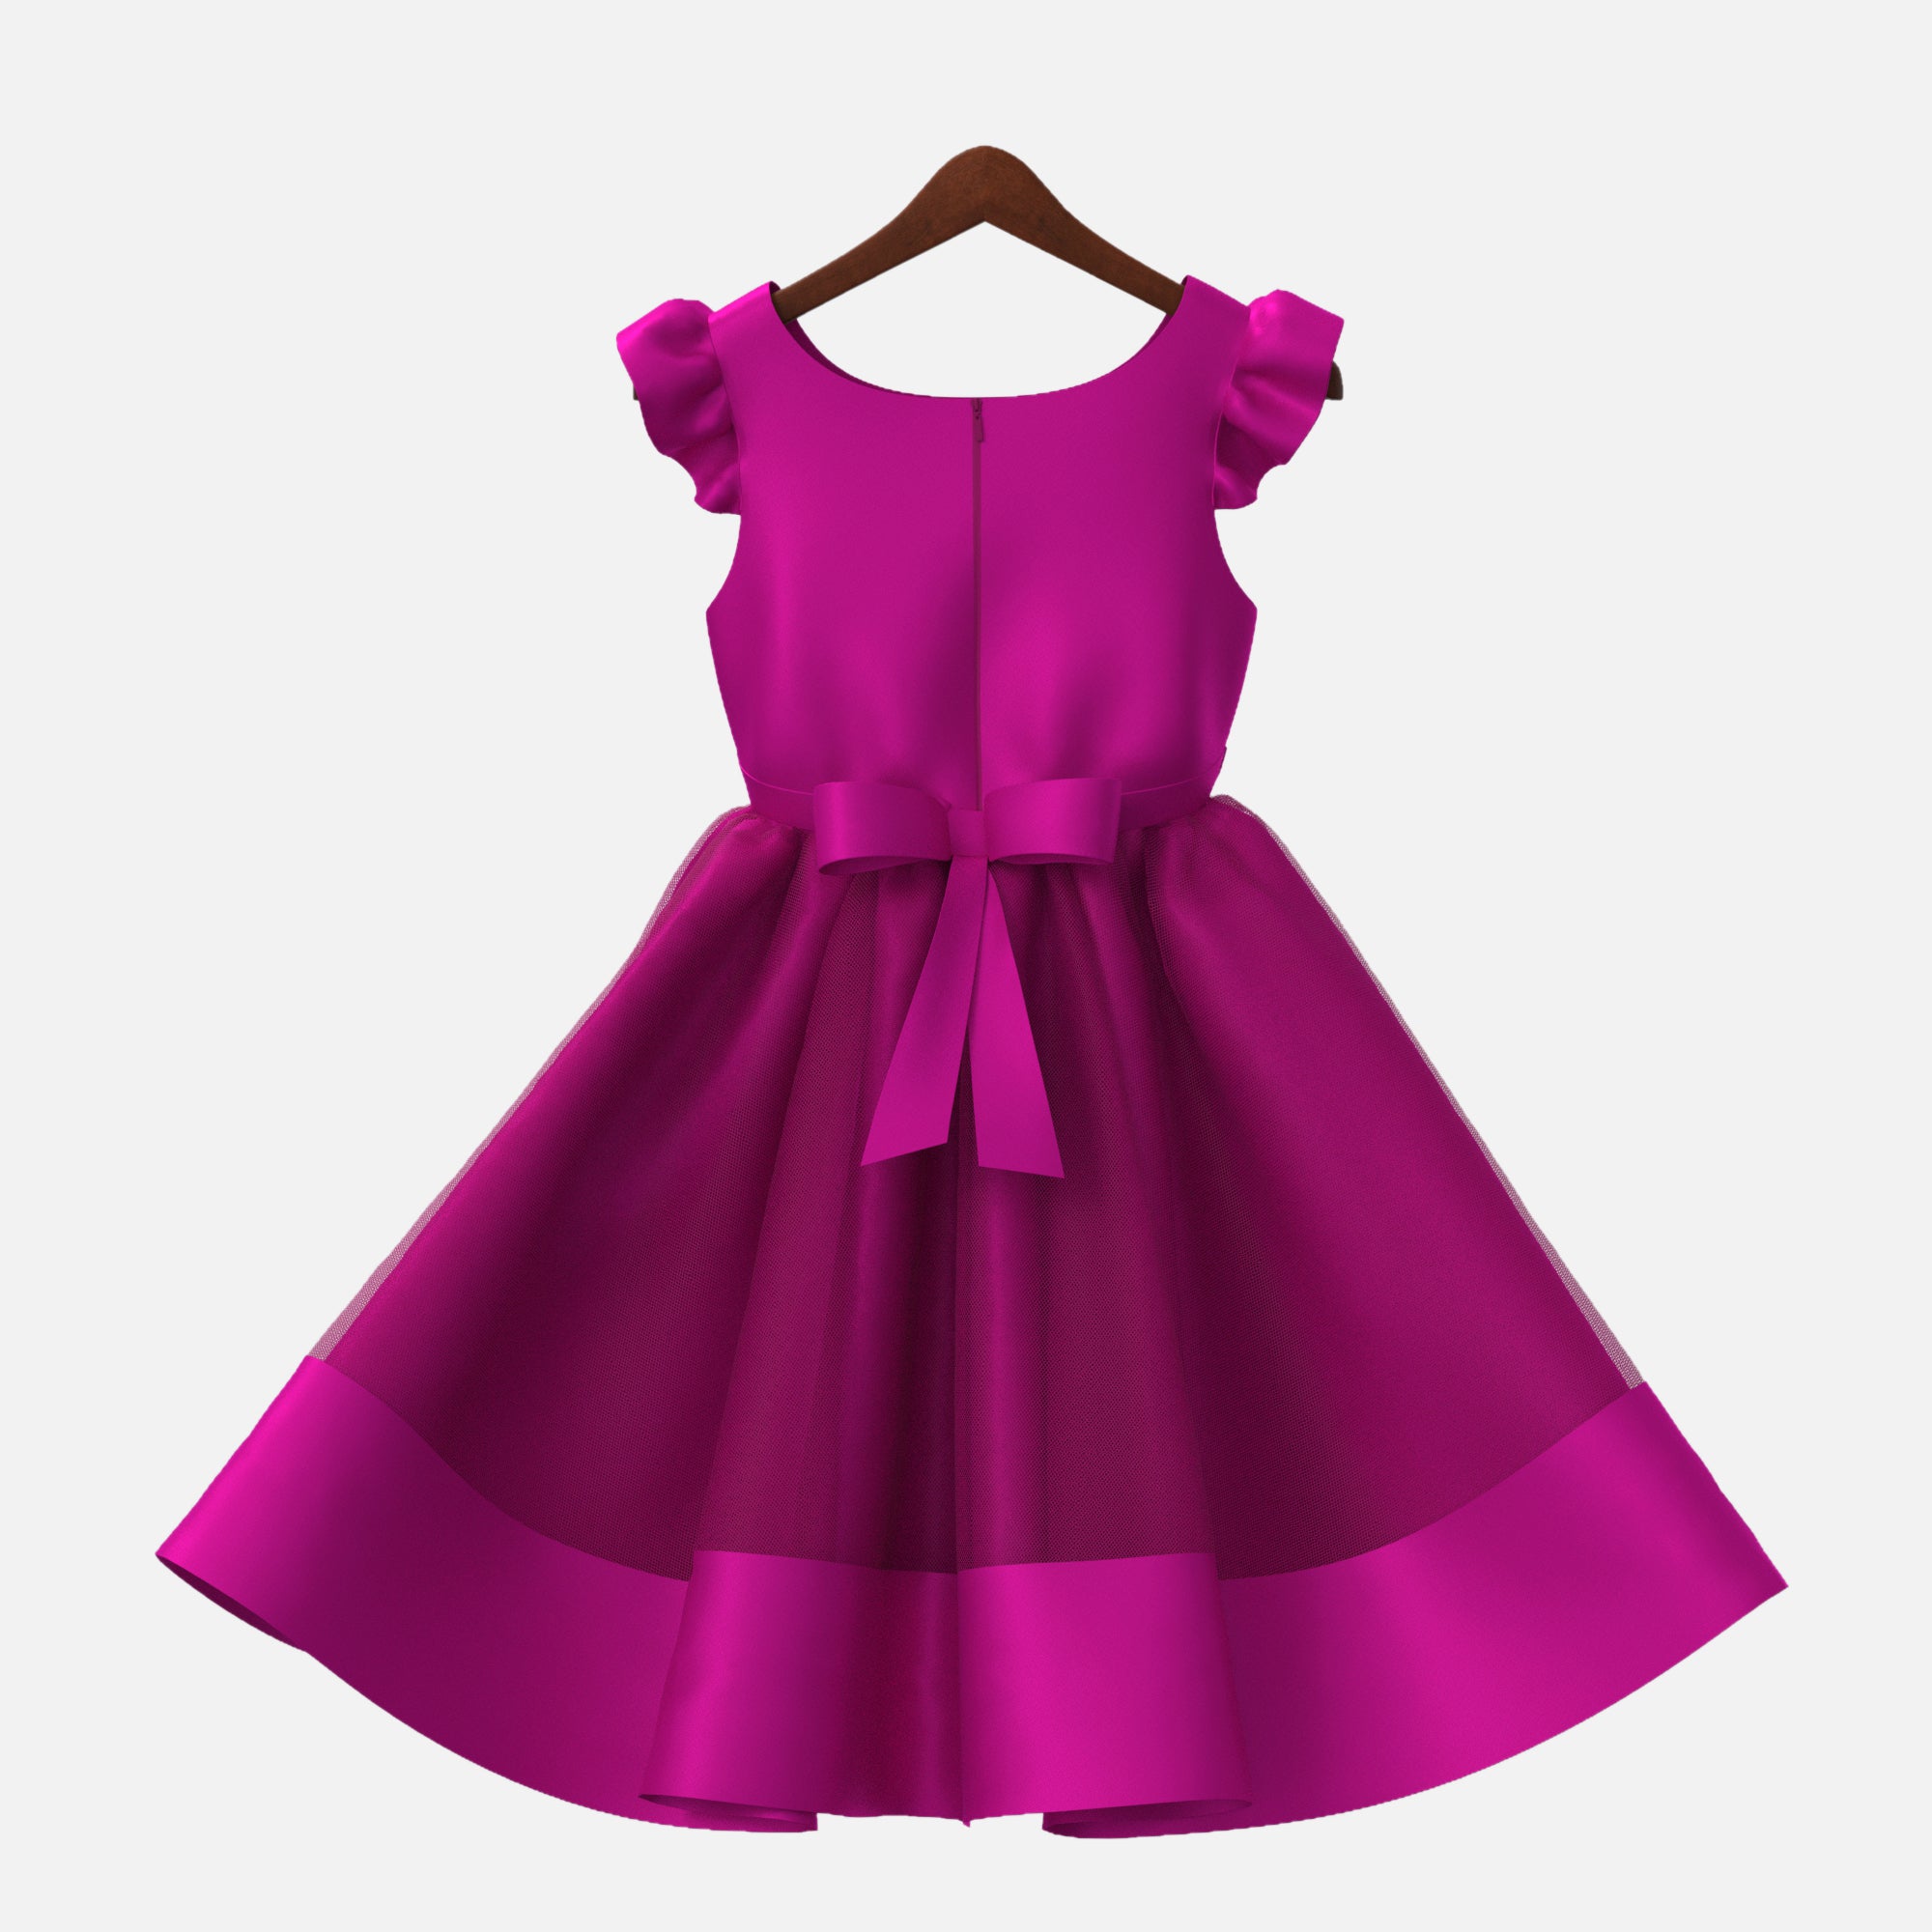 Beautiful party dress one piece for special occasion for girls boutique  made design for celebrations and special occasion available at nepkidscom  your kids shopping store  NEPKIDS